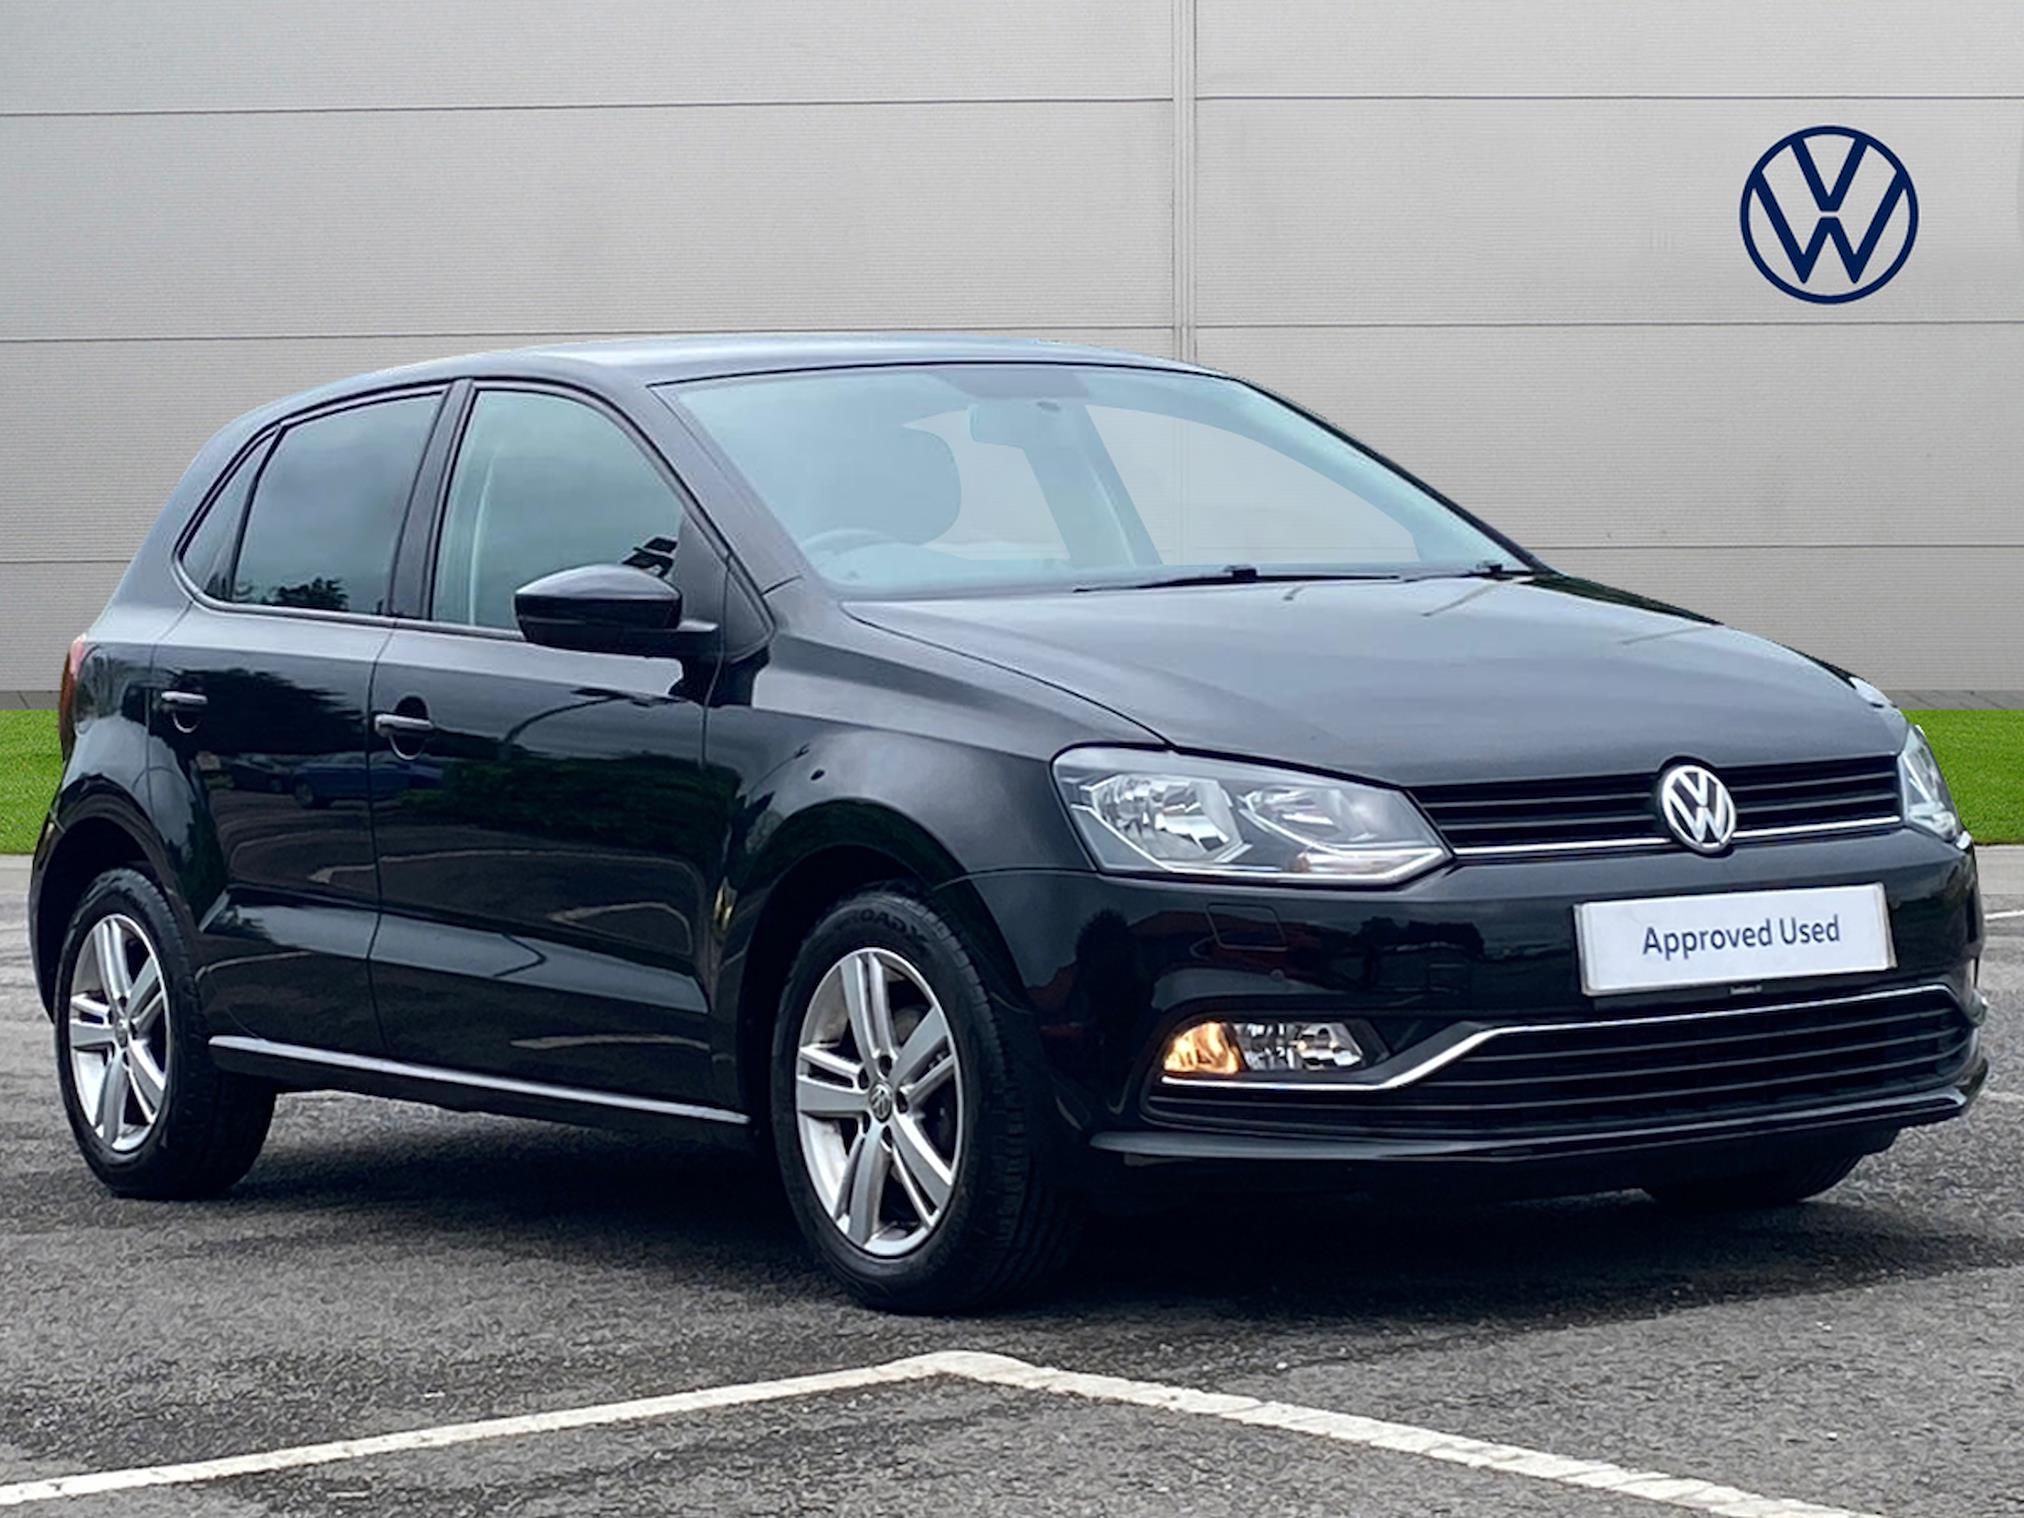 Used VOLKSWAGEN POLO 1.2 Tsi Match 5Dr 2016